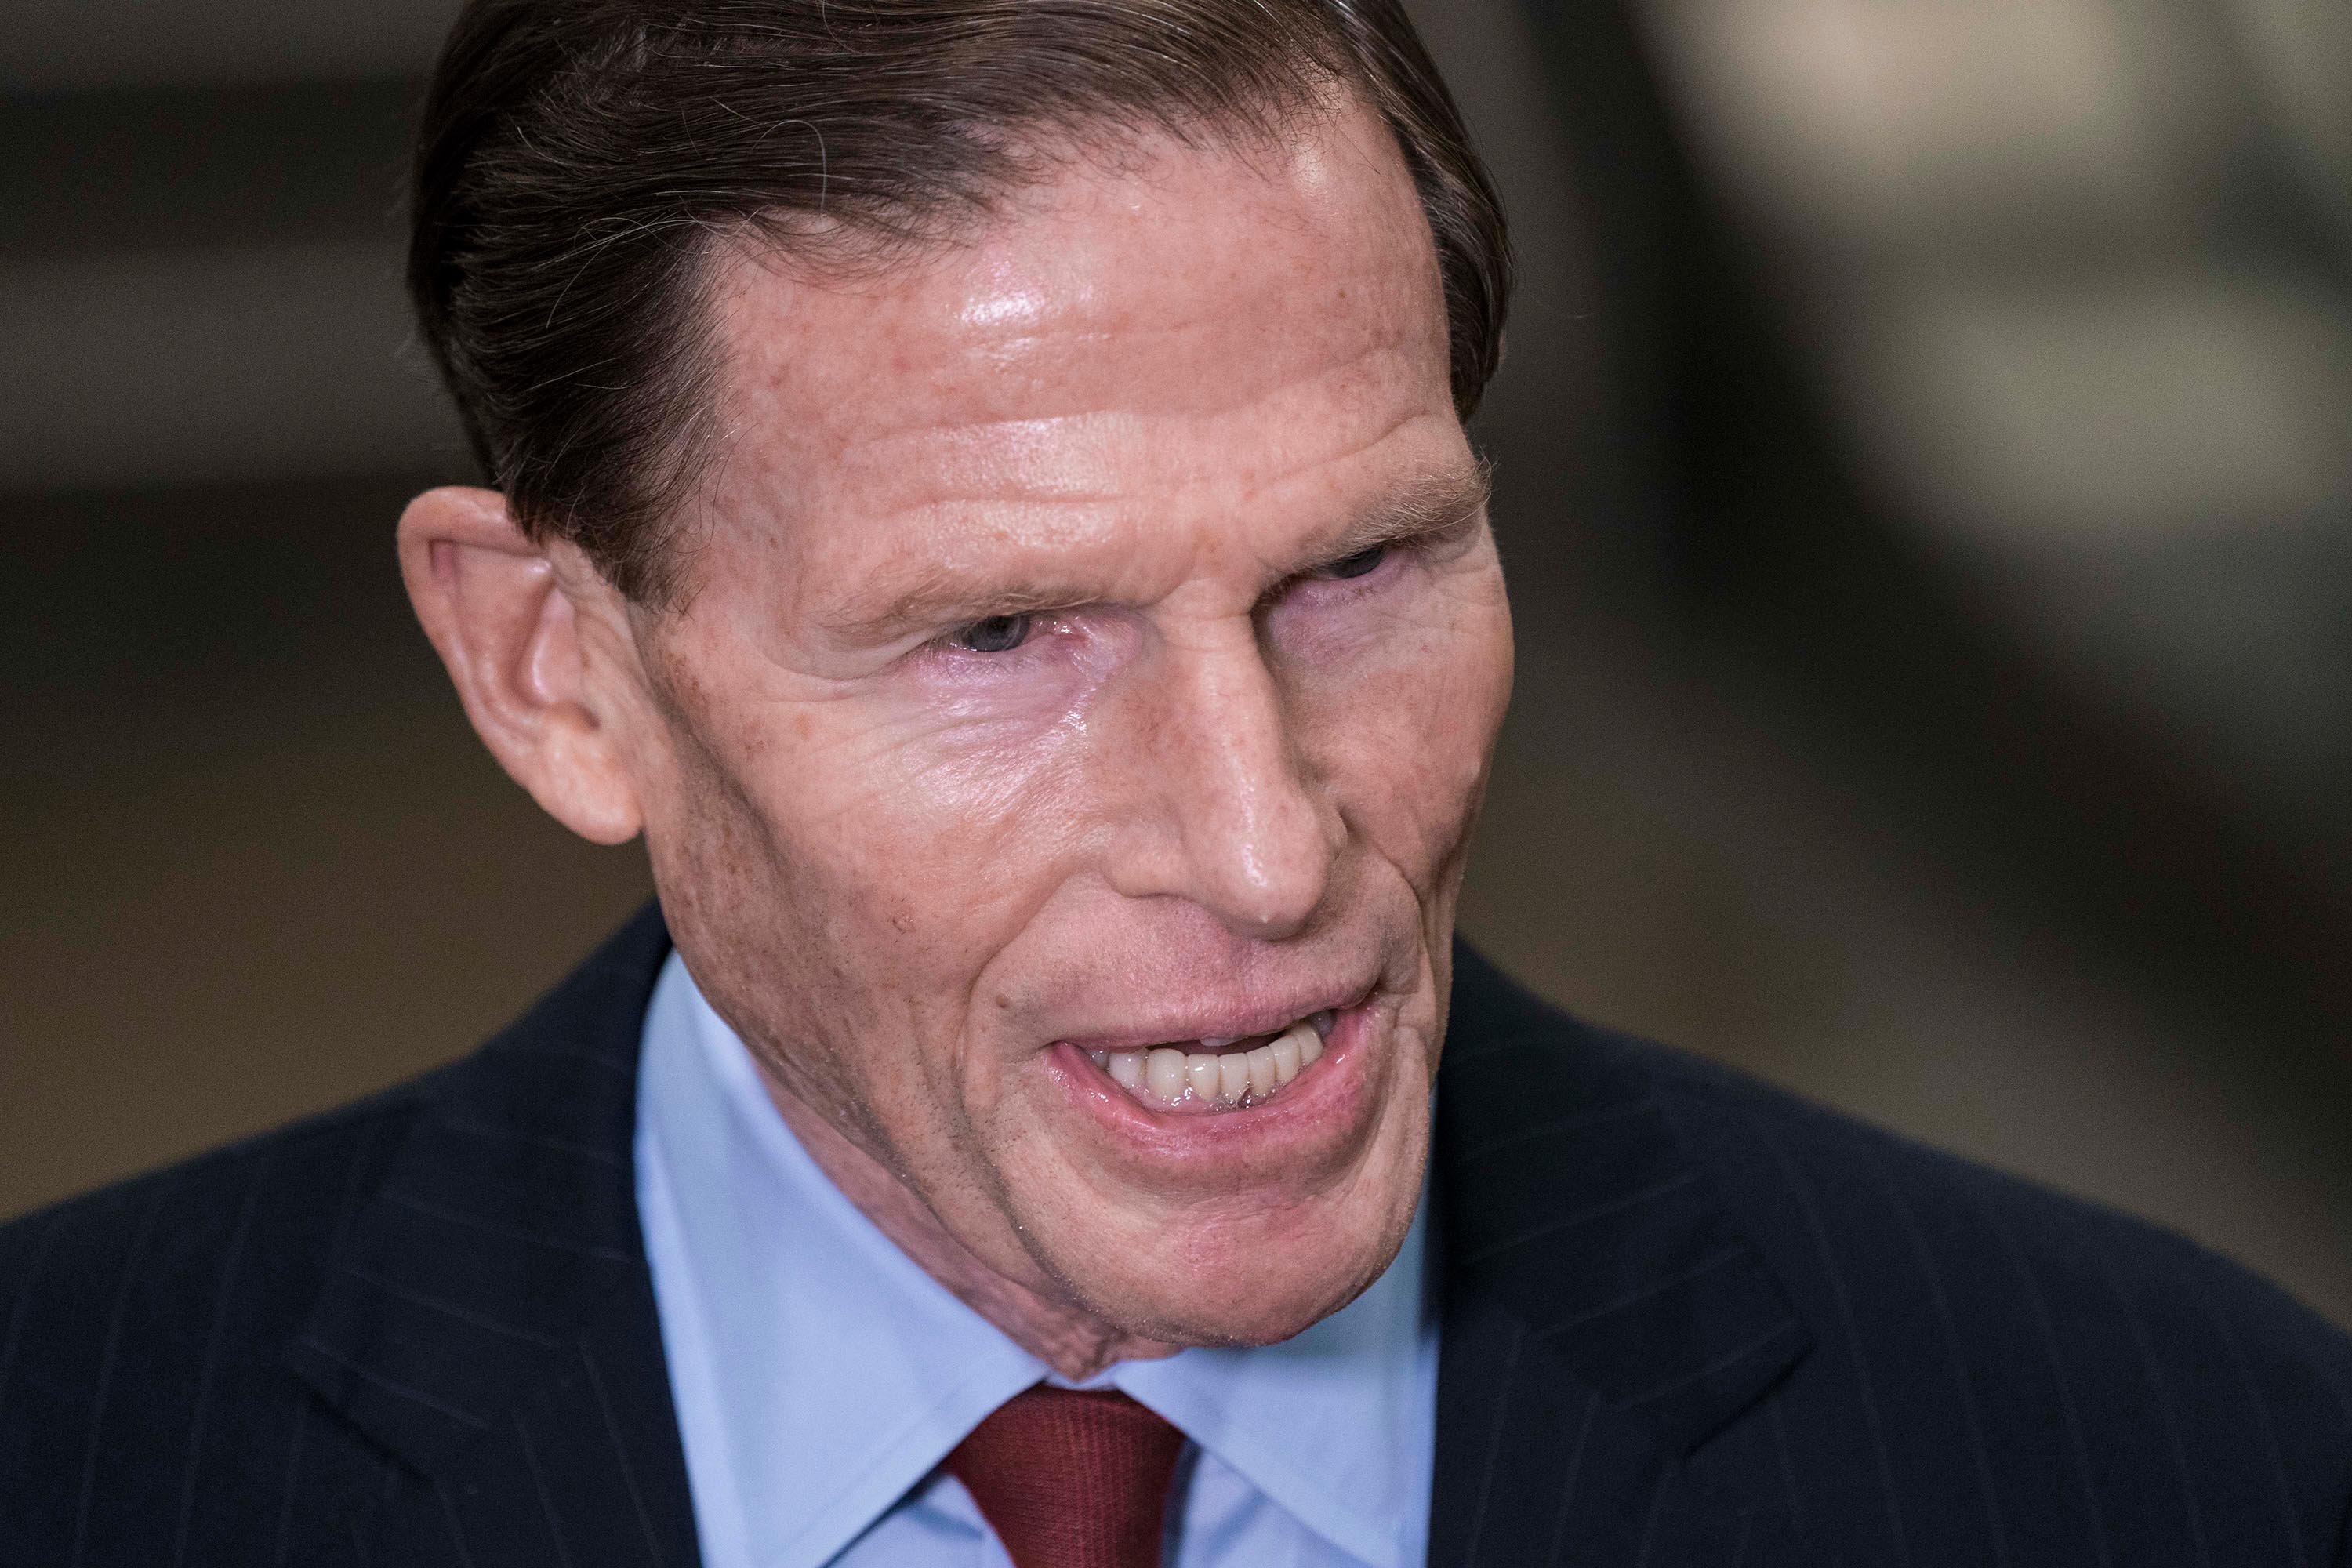 Sen. Richard Blumenthal speaks to reporters at the US Capitol, January 29.